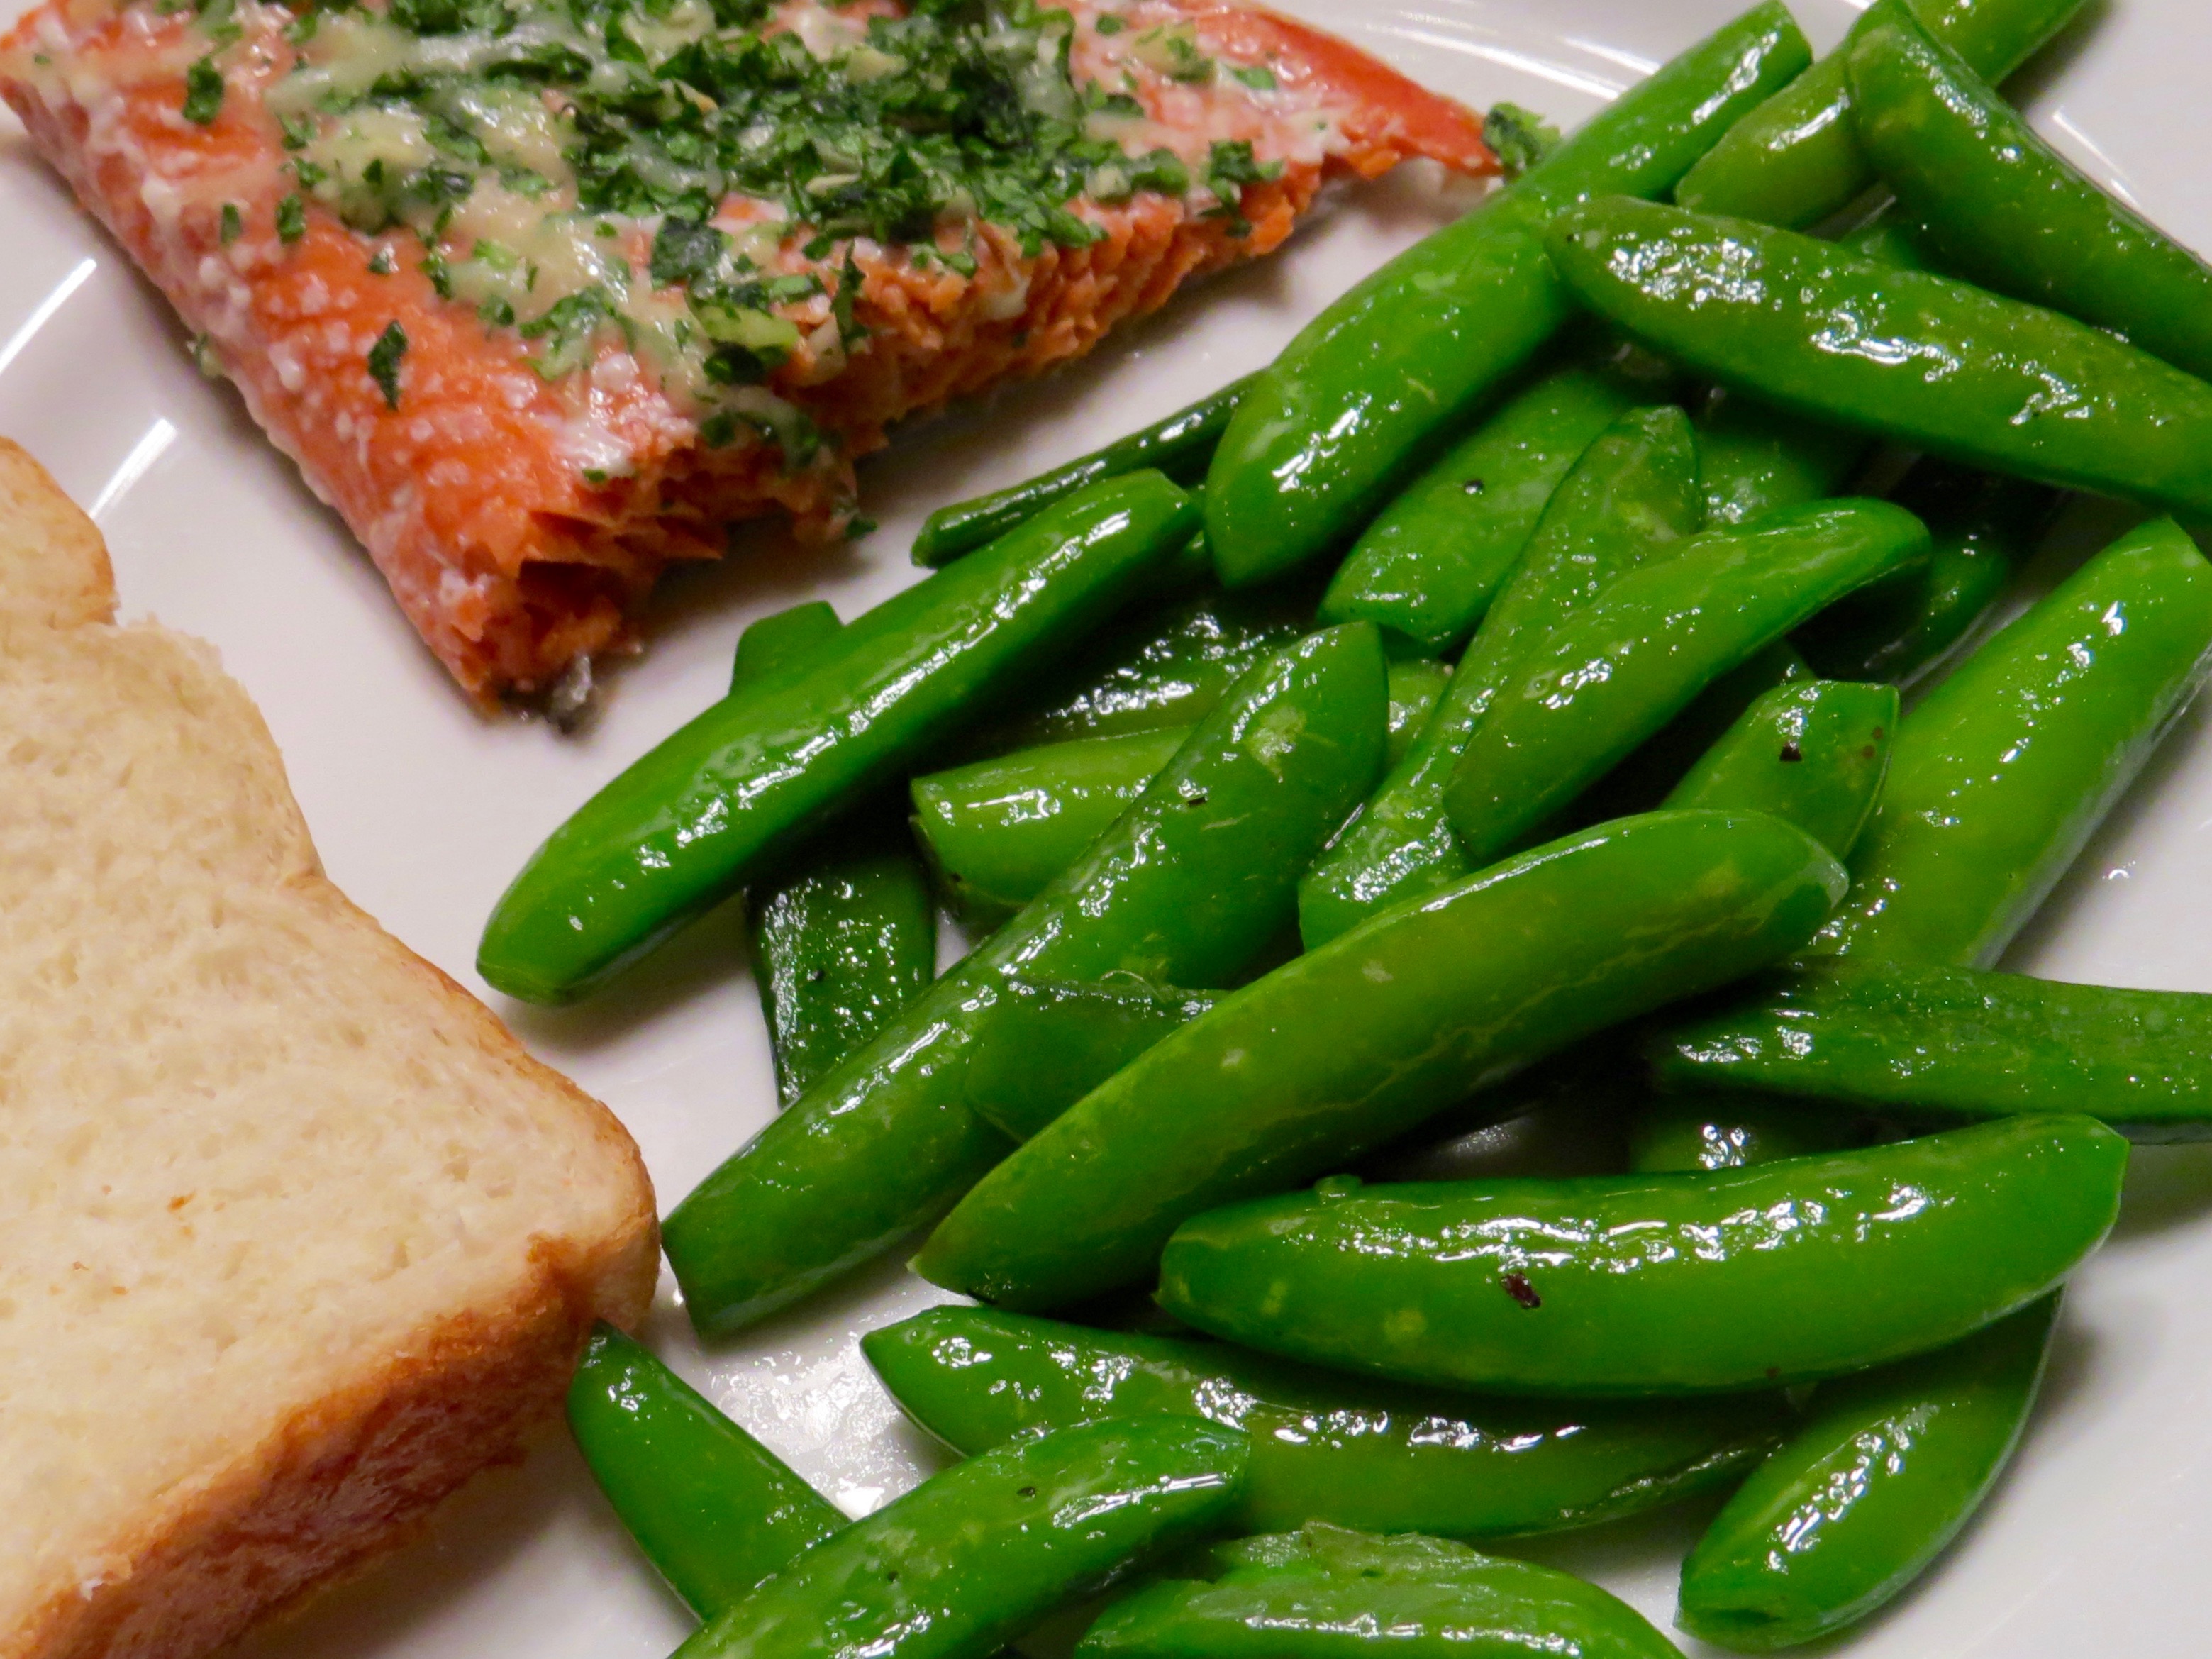  BAKED SALMON WITH PARMESAN HERB CRUST, SAUTEED SUGAR SNAP PEAS AND HOMEMADE BREAD.